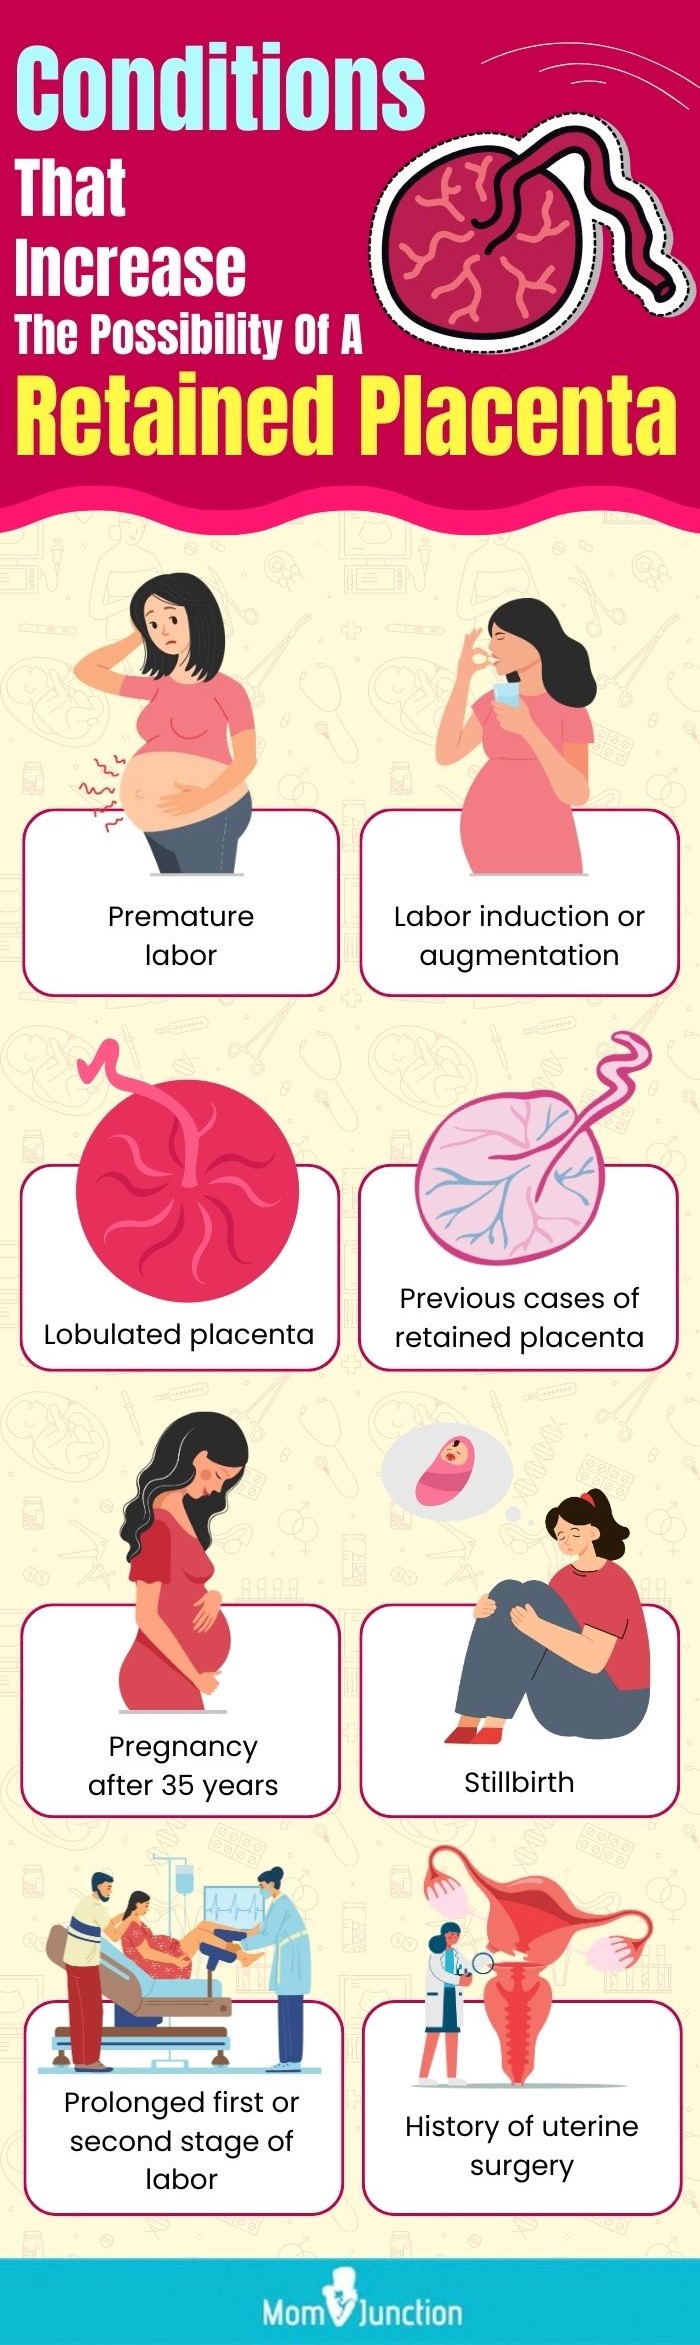 conditions that increase the possibility of a retained placenta (infographic)